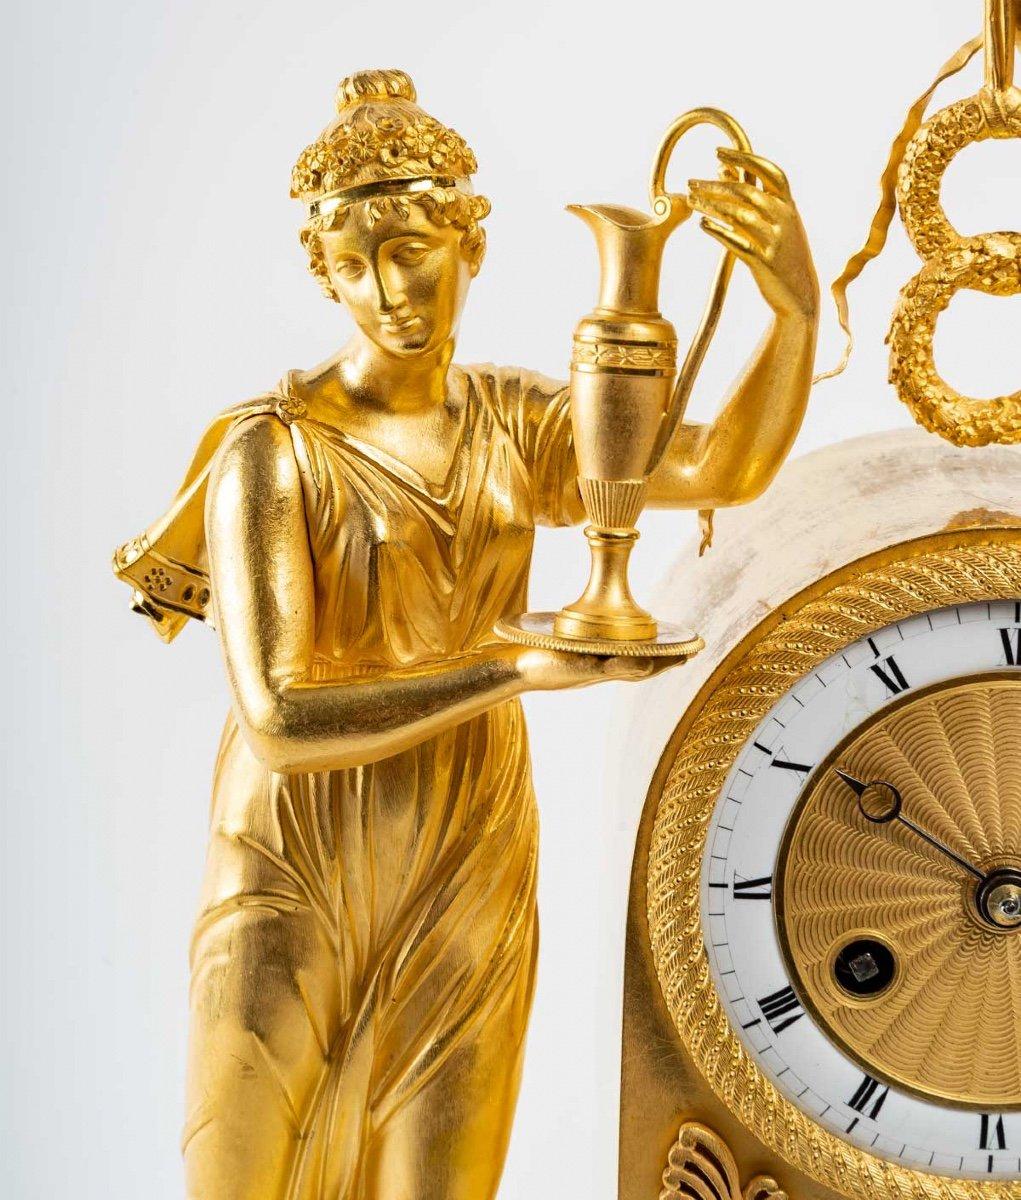 Sublime gilded bronze clock representing Goddess Hera 
The mercury gilding is original. The dial is white enamelled and the hours are written in Roman numerals.
Restoration period
Measures: H: 48,5 cm, W: 34,5 cm, D: 12,5 cm
Original mechanism